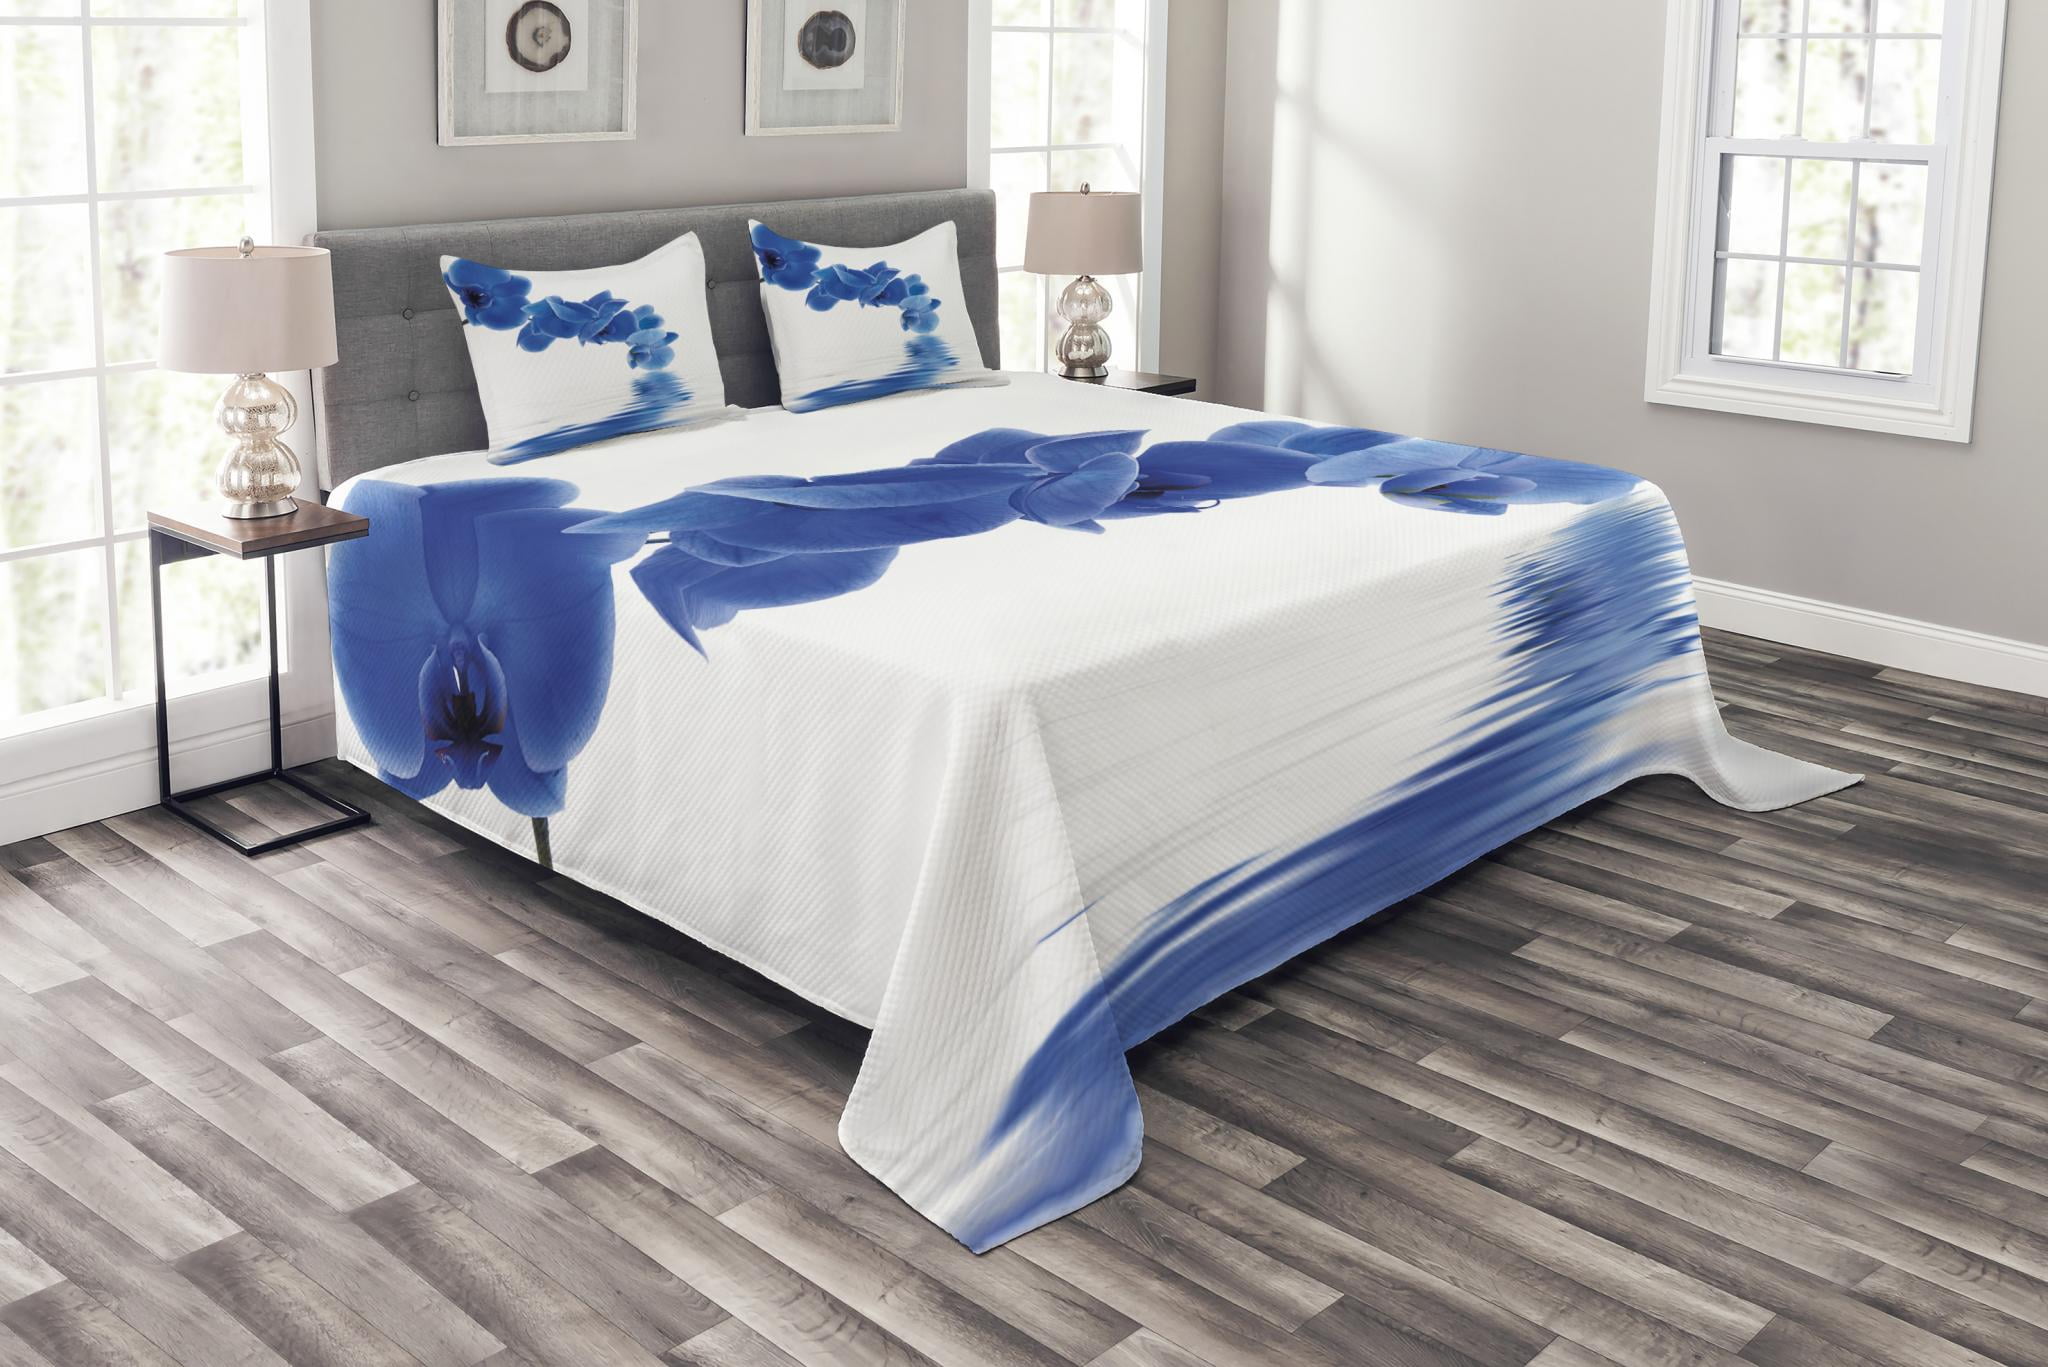 Blue Bedspread Set King Size, Orchid Corsage Composition with ...